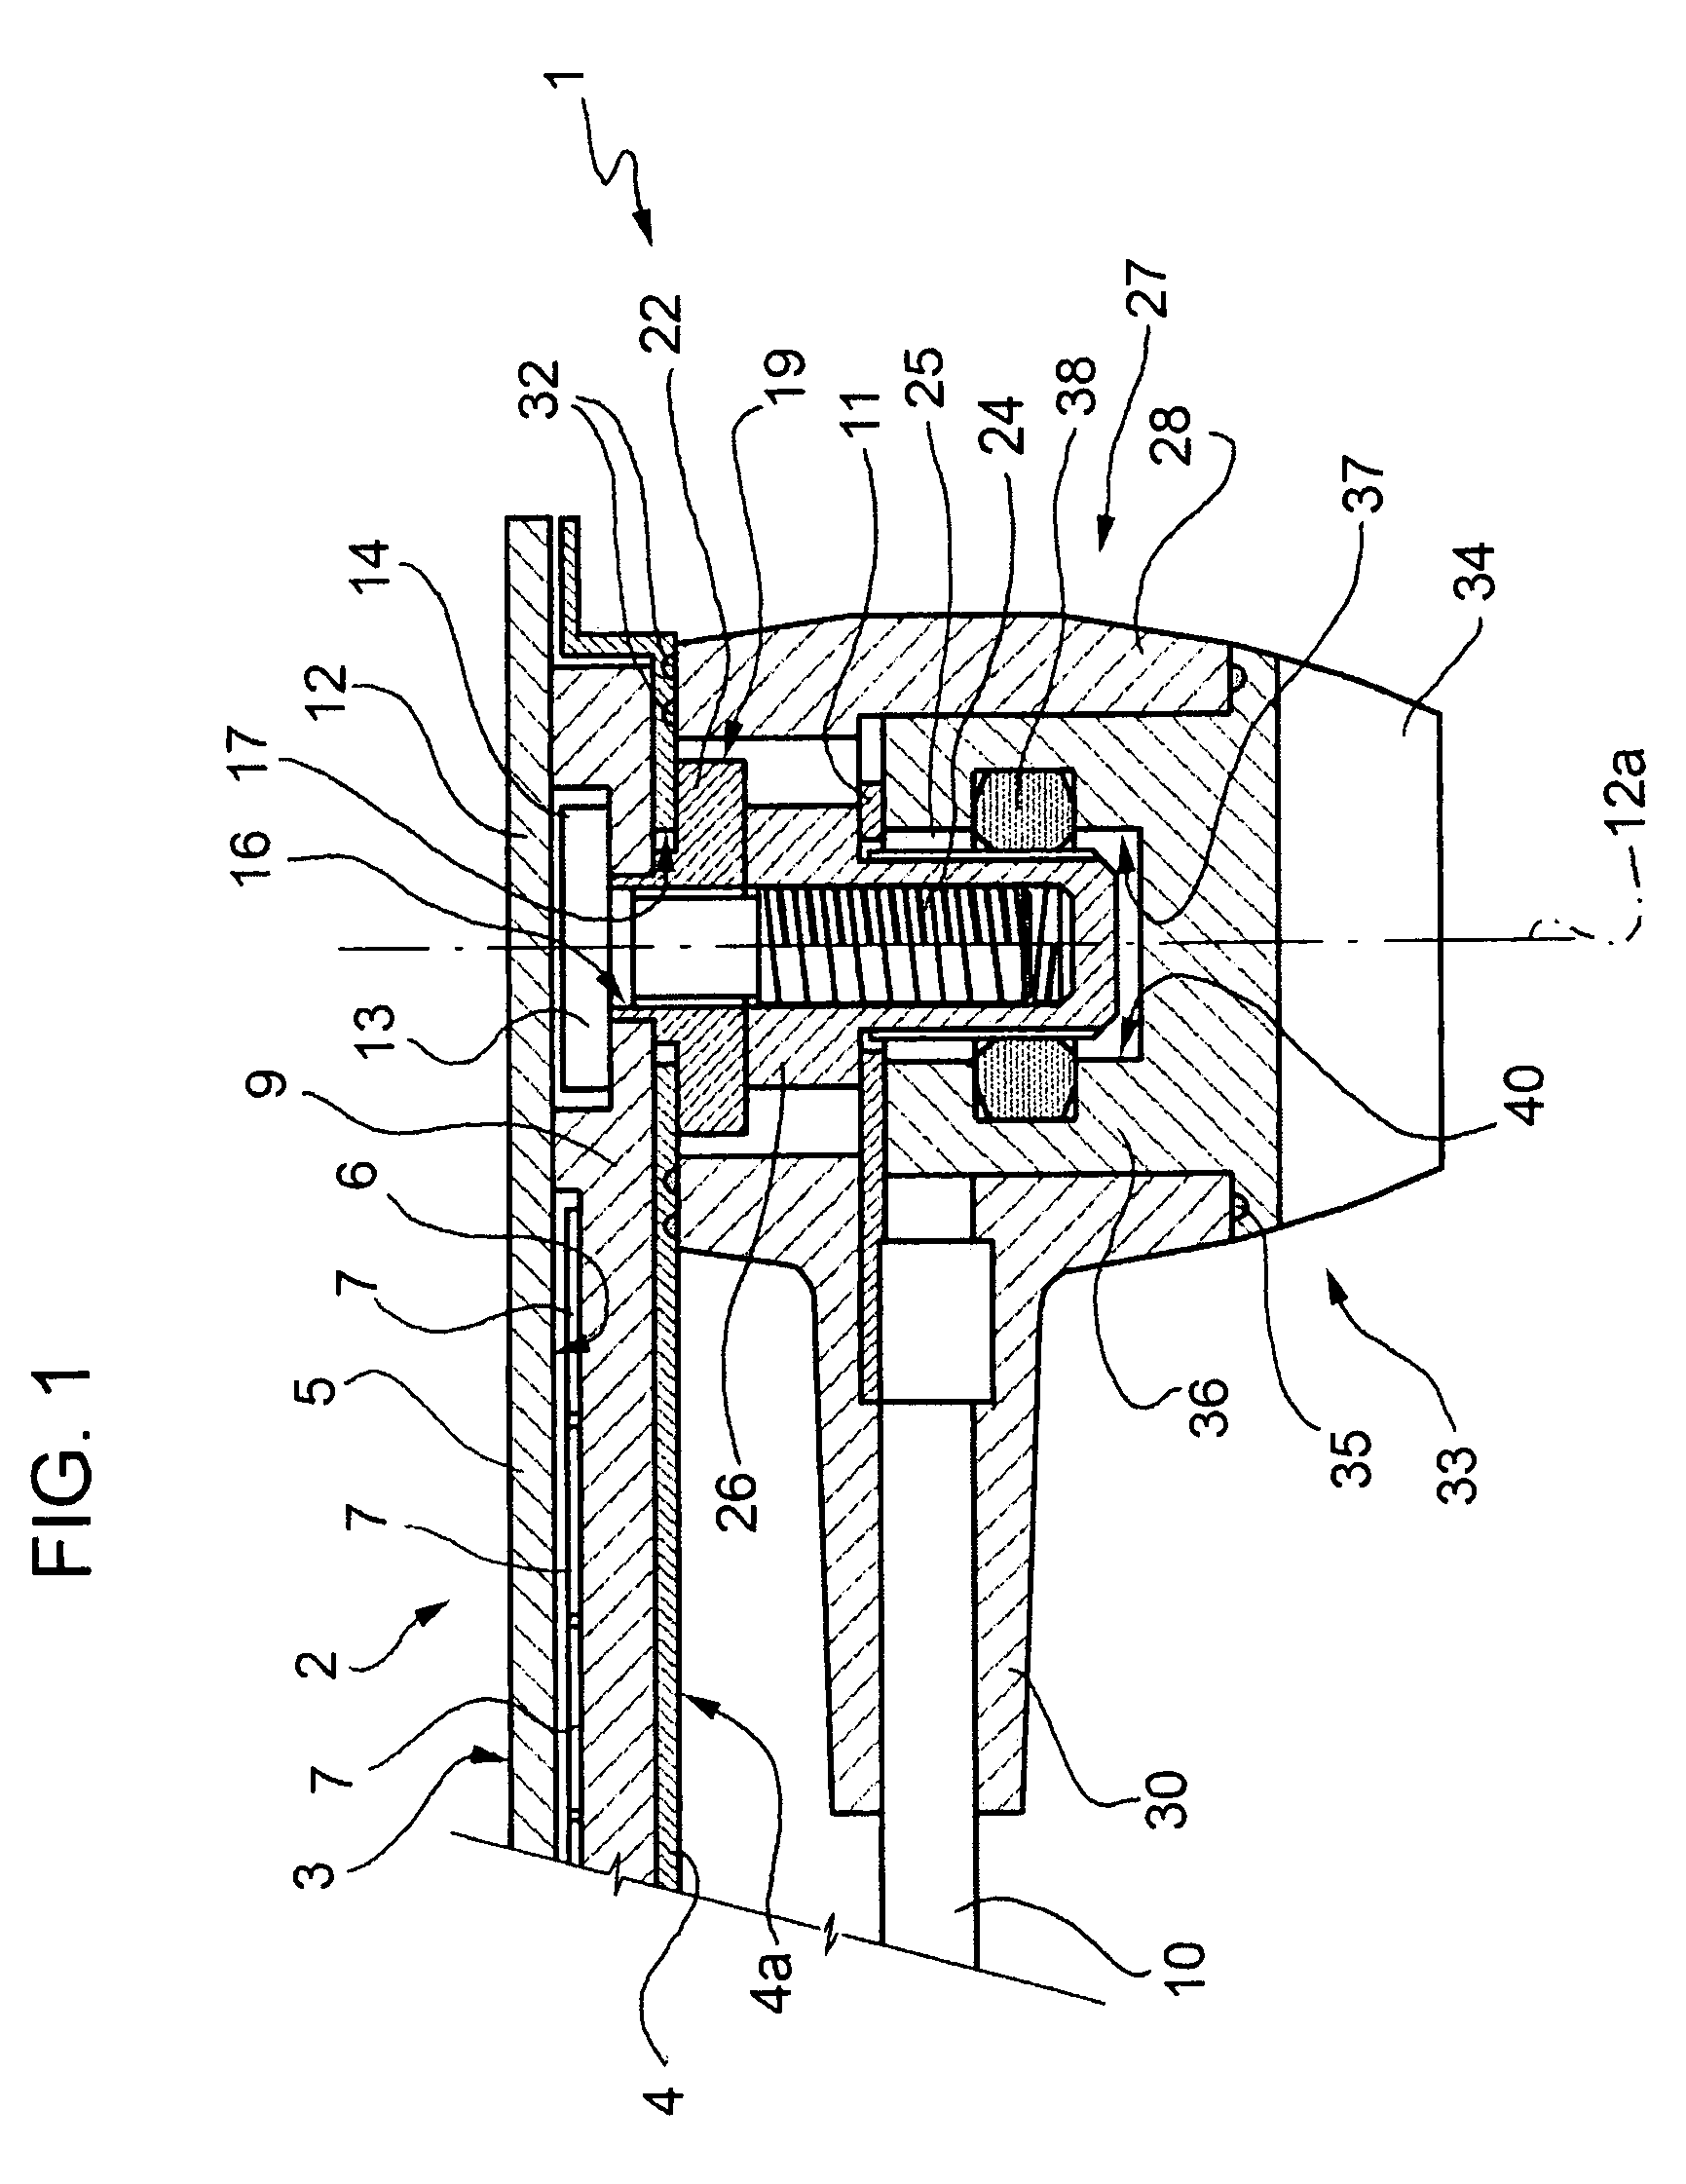 Electrical-connection device, particularly for photovoltaic-cell solar panels